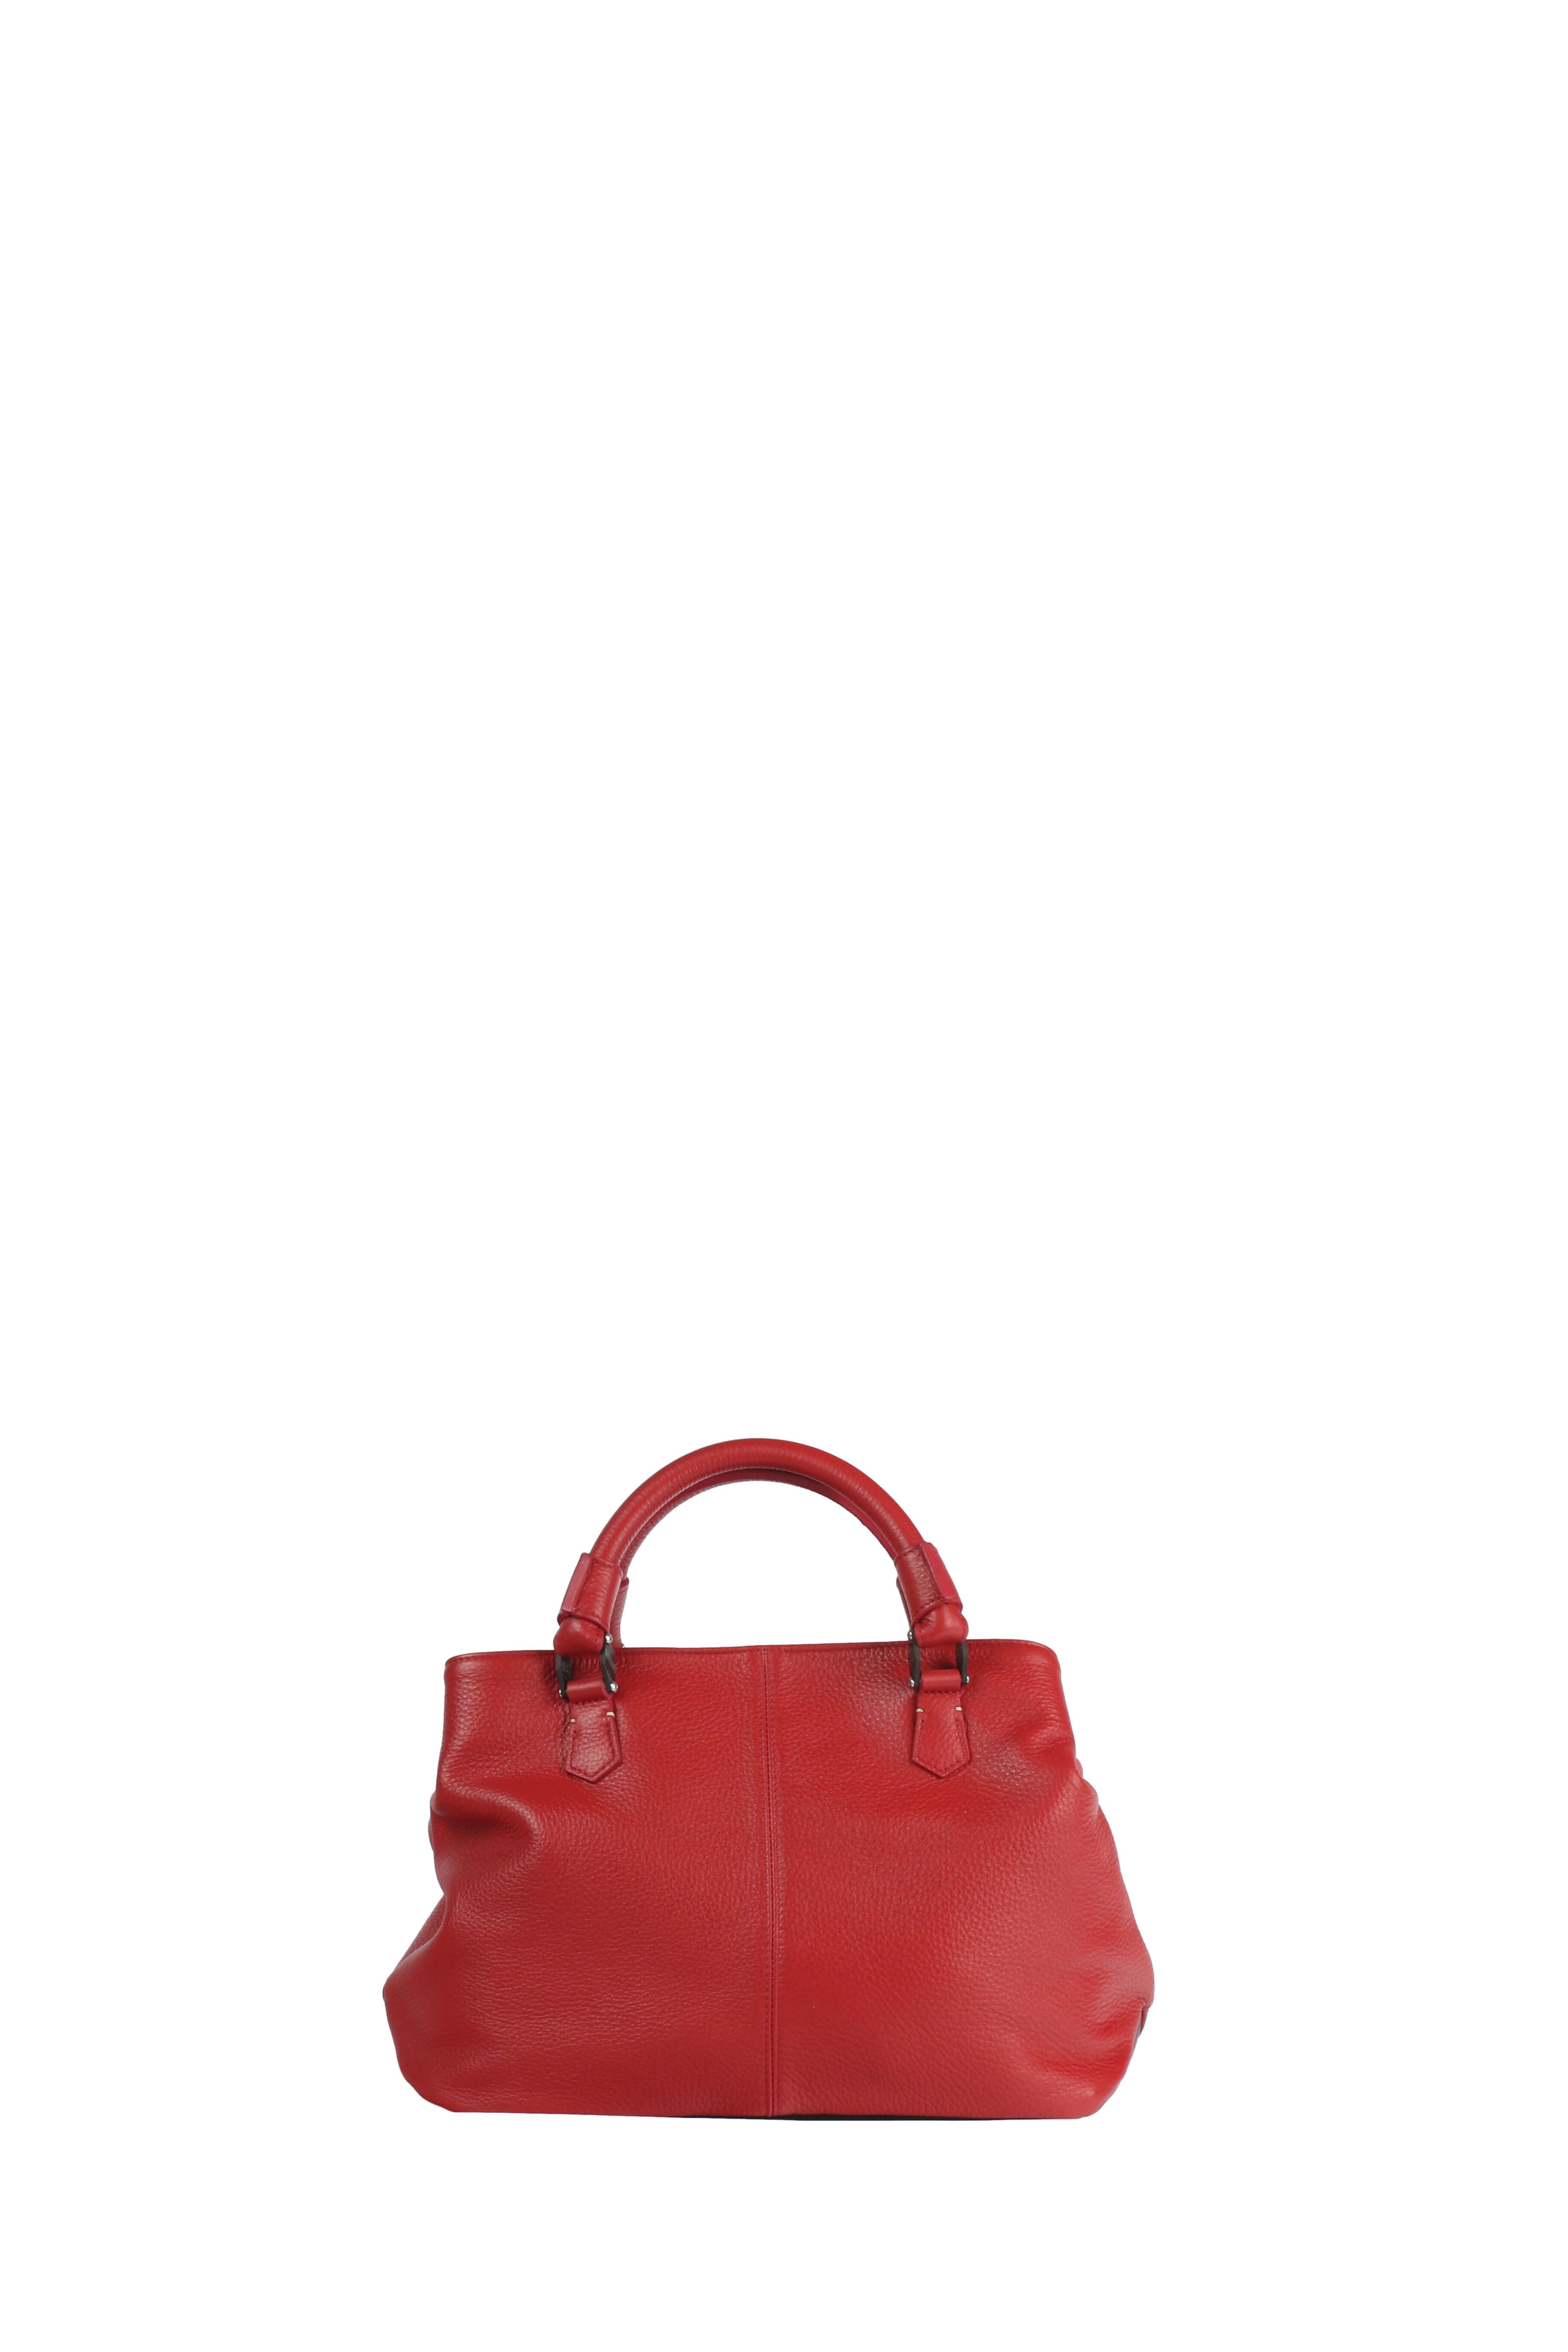 Ormeggia Deer Leather Hand Bag, Red